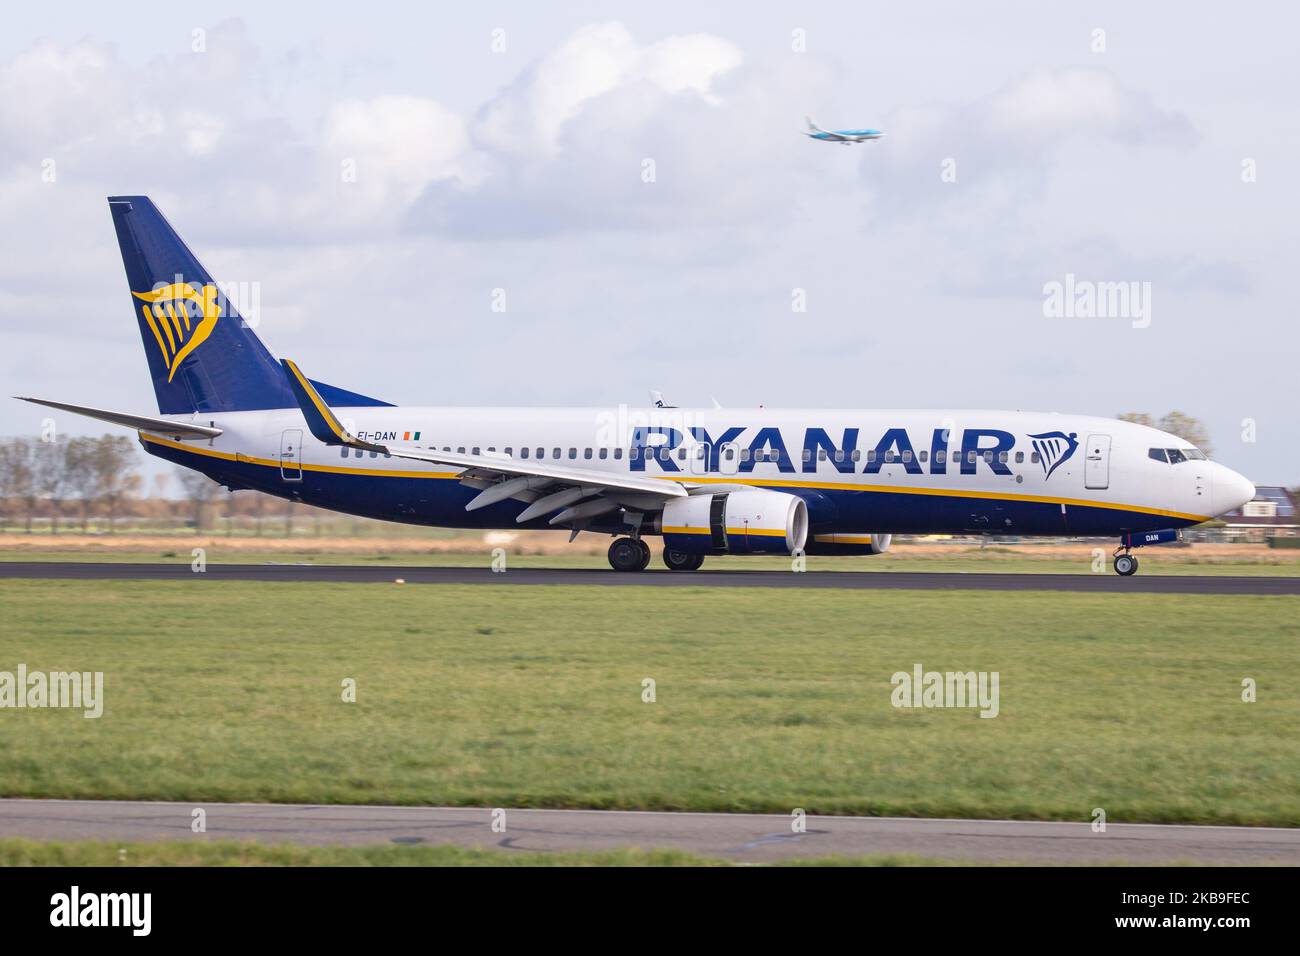 Ryanair low cost carrier, Boeing 737-8AS(WL) aircraft as seen on final approach landing on Polderbaan runway 18R/36L at Amsterdam Schiphol International Airport AMS EHAM in The Netherlands. The Boeing 737-800 Next Gen has the registration EI-DAN with 2x CFMI jet engines. Ryanair RYR FR, the Irish budget carrier connects the Dutch city with Dublin, Ireland and Malaga, Spain. Amsterdam, Netherlands - October 27, 2019 (Photo by Nicolas Economou/NurPhoto) Stock Photo